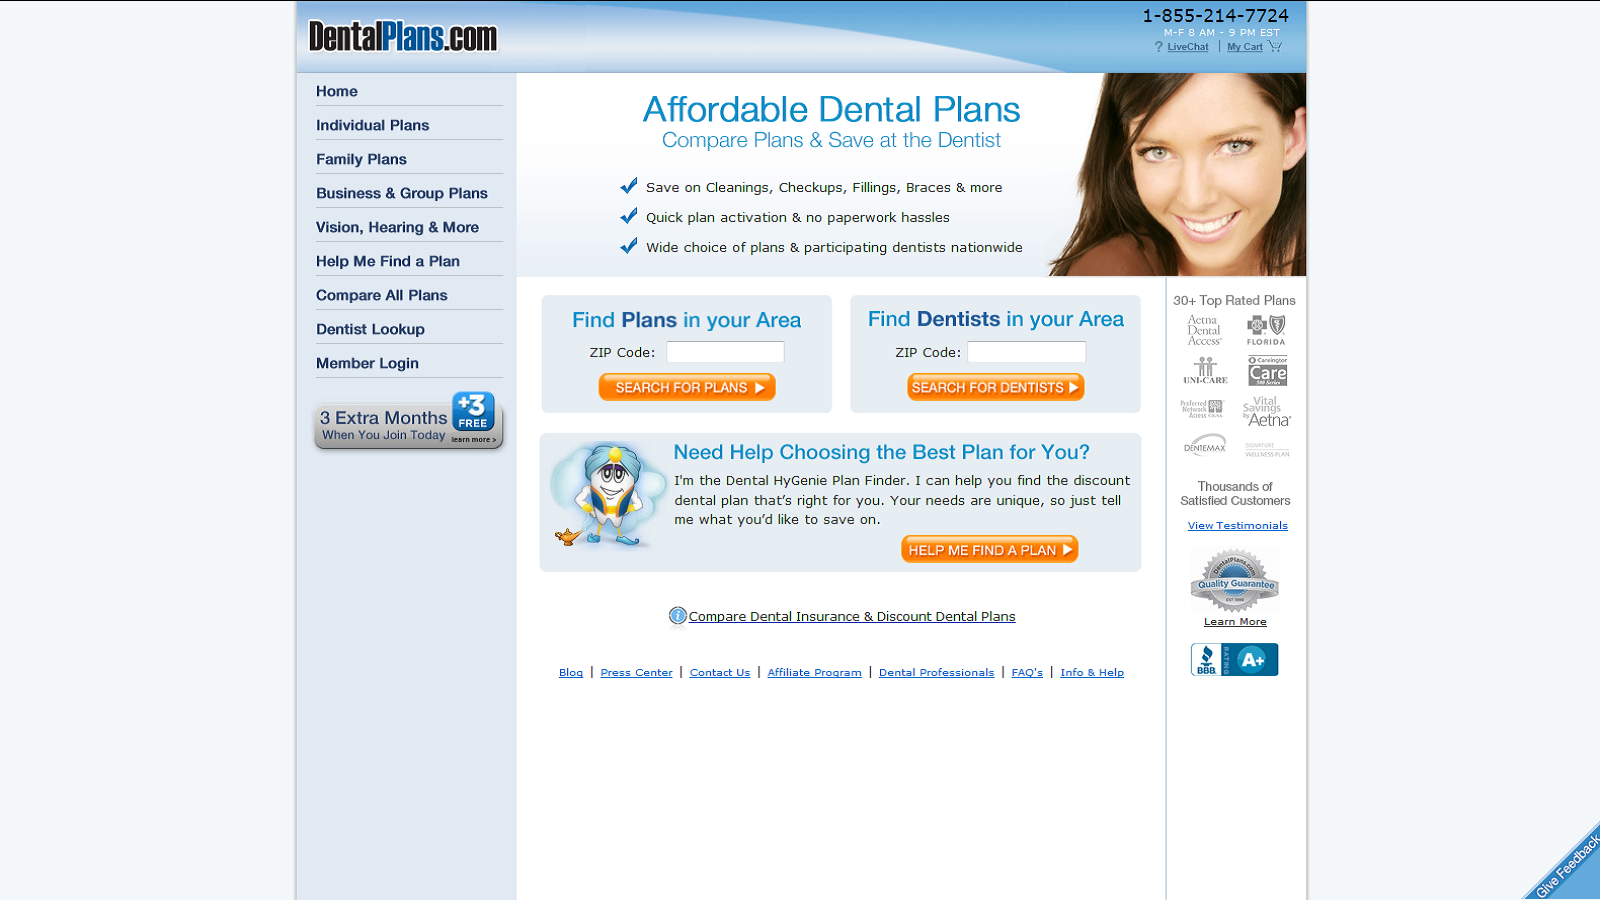 Where To Get Affordable Dental Plans Online